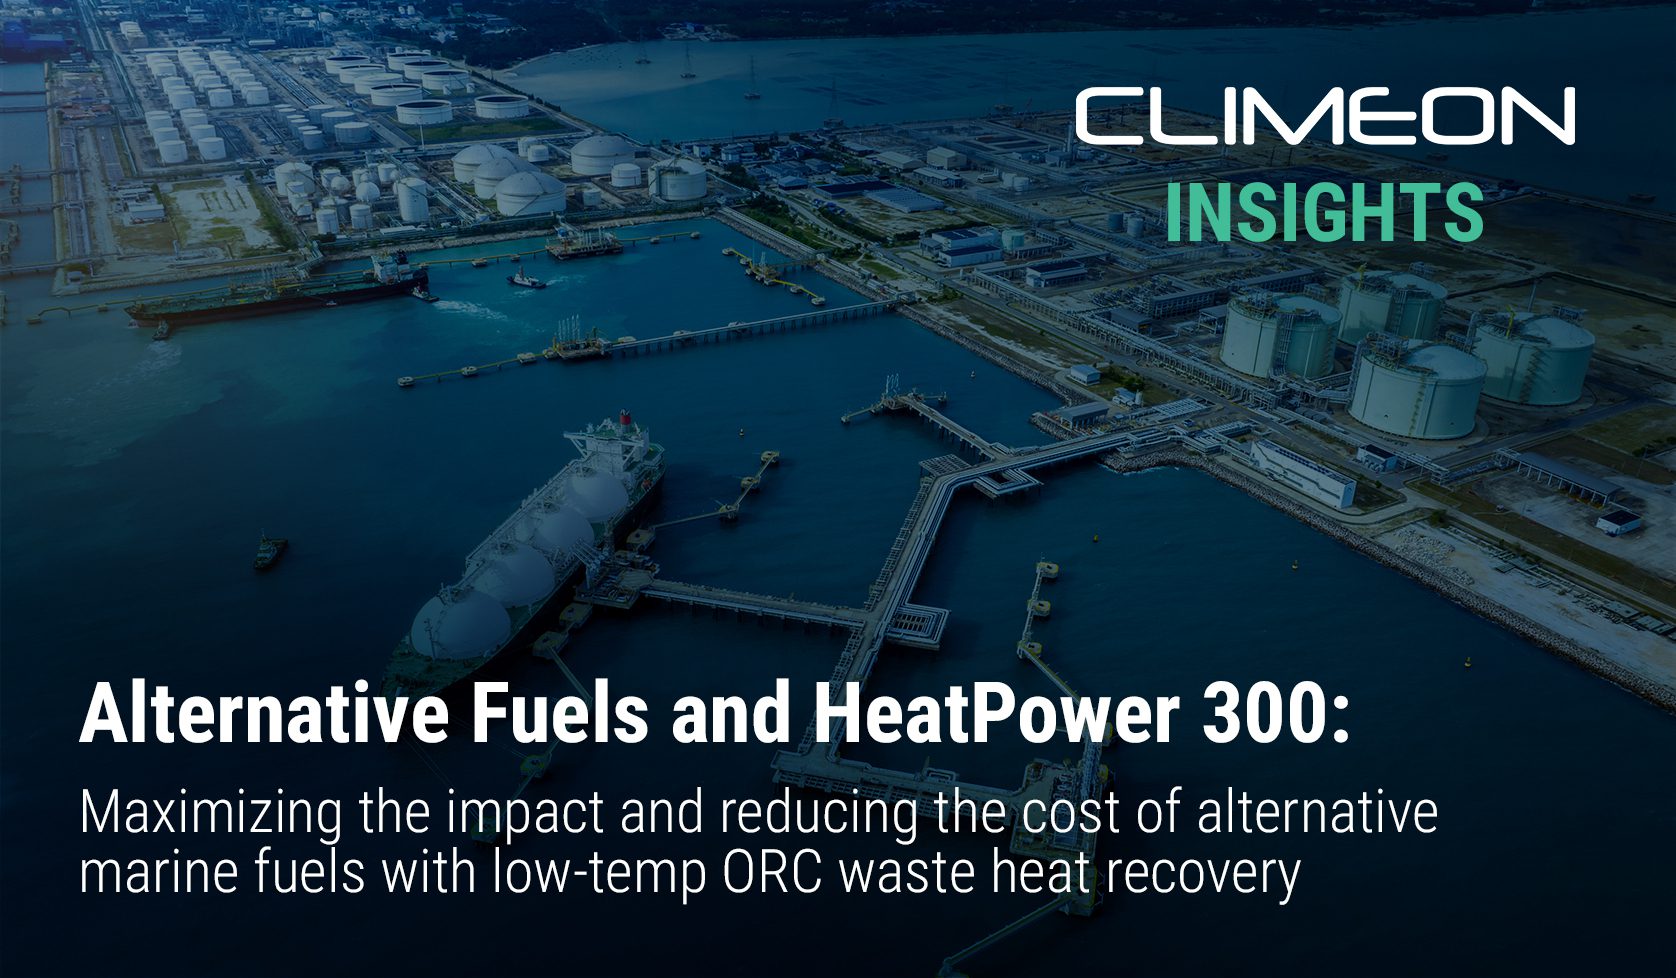 Maximizing the Impact and Reducing the Cost of Alternative Fuels with HeatPower 300 